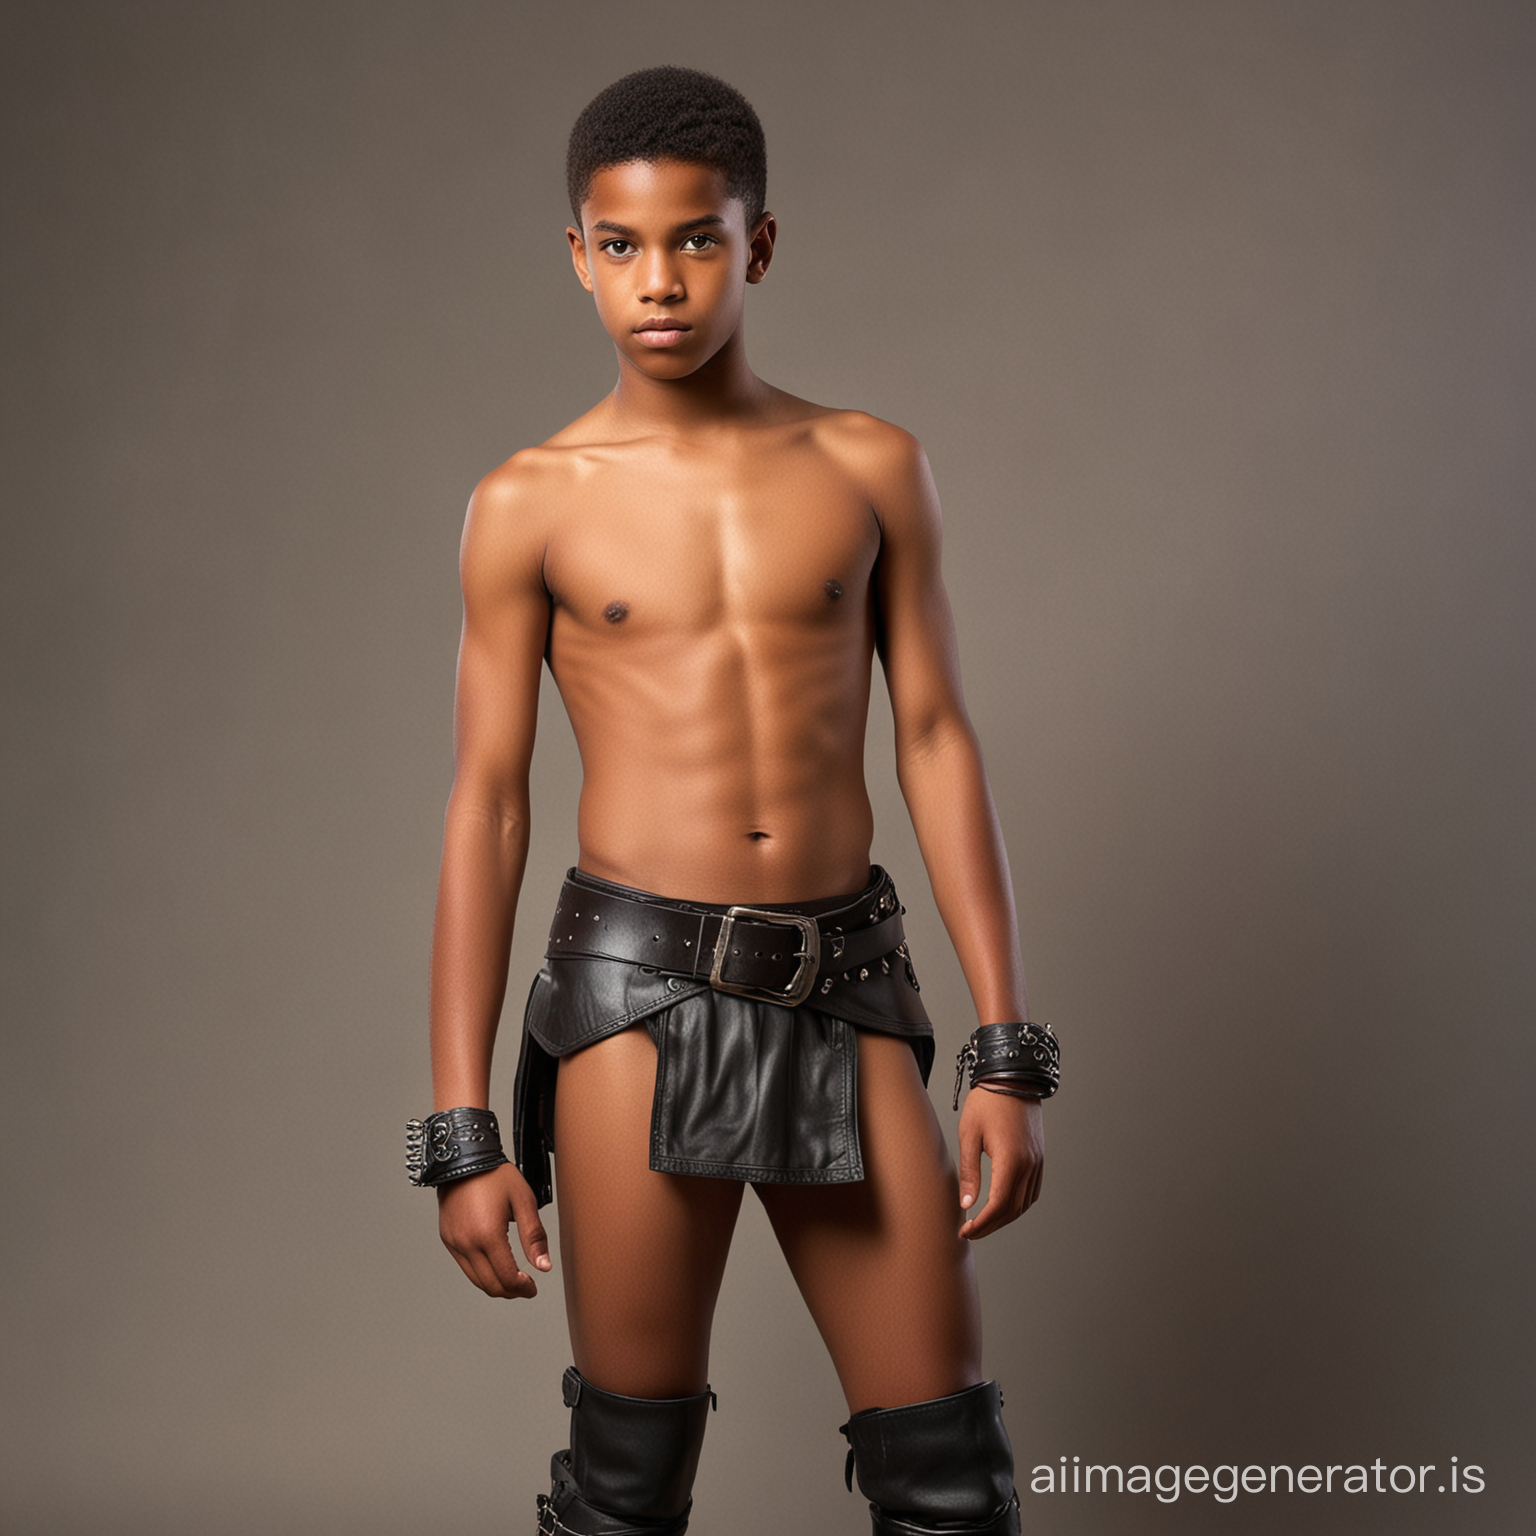 A very young black shirtless teenage boy warrior wearing a very short loincloth, a big leather belt and boots.